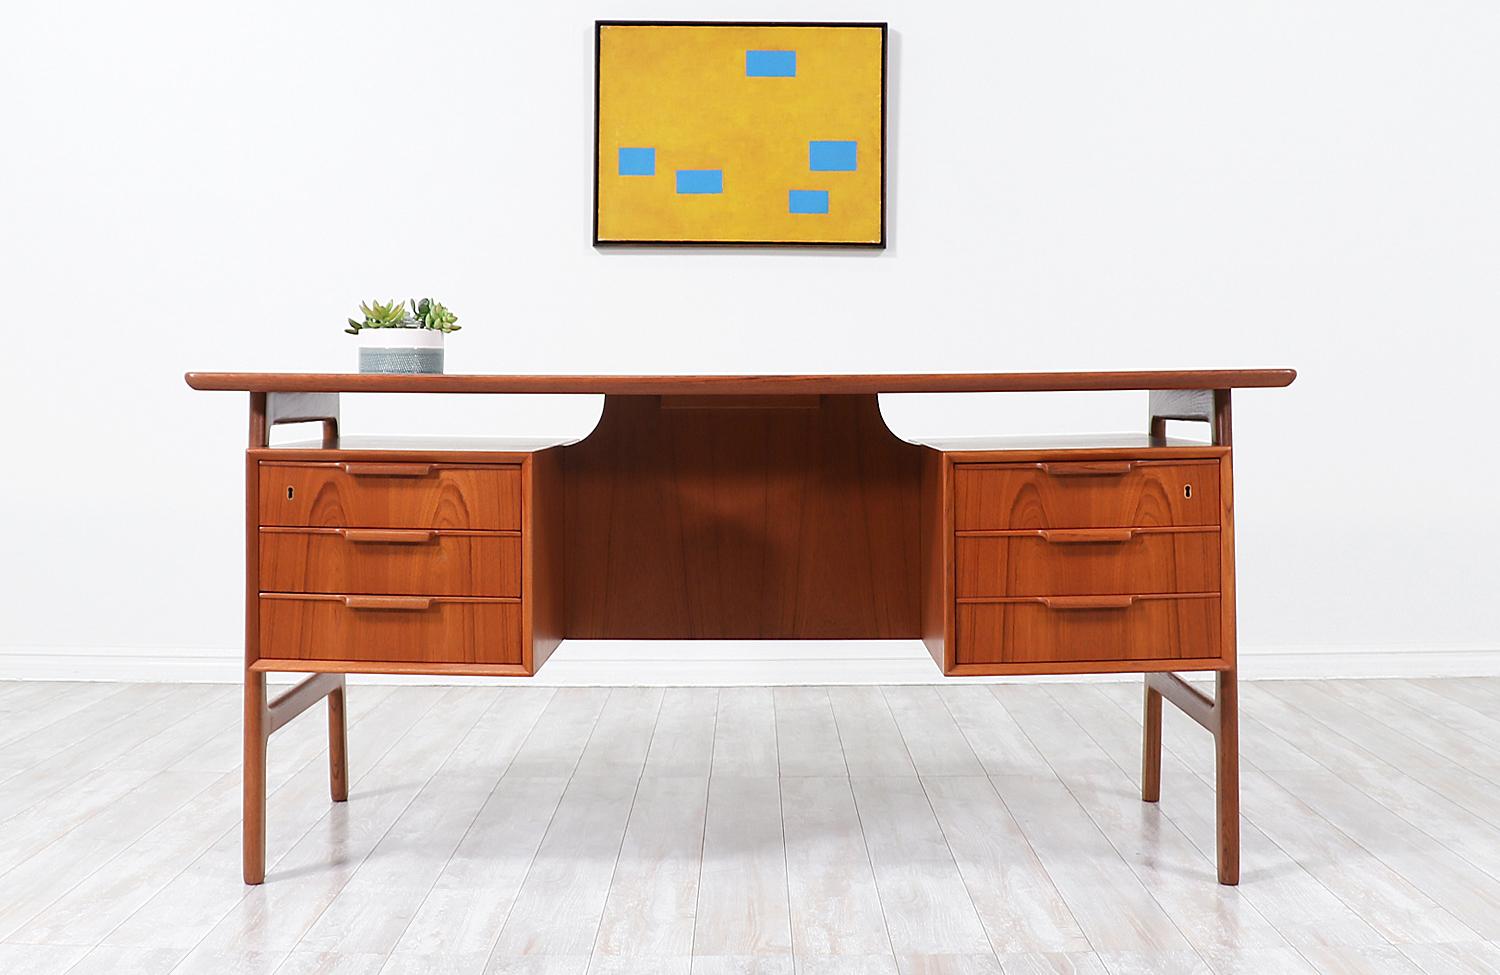 A stunning modern executive desk designed by architect Gunni Omann for his family-owned company Omann Jun, in Denmark, circa 1960s. The handcrafted profile and sculptural Model-75 desk features a sturdy frame that helps elevates the case of drawers